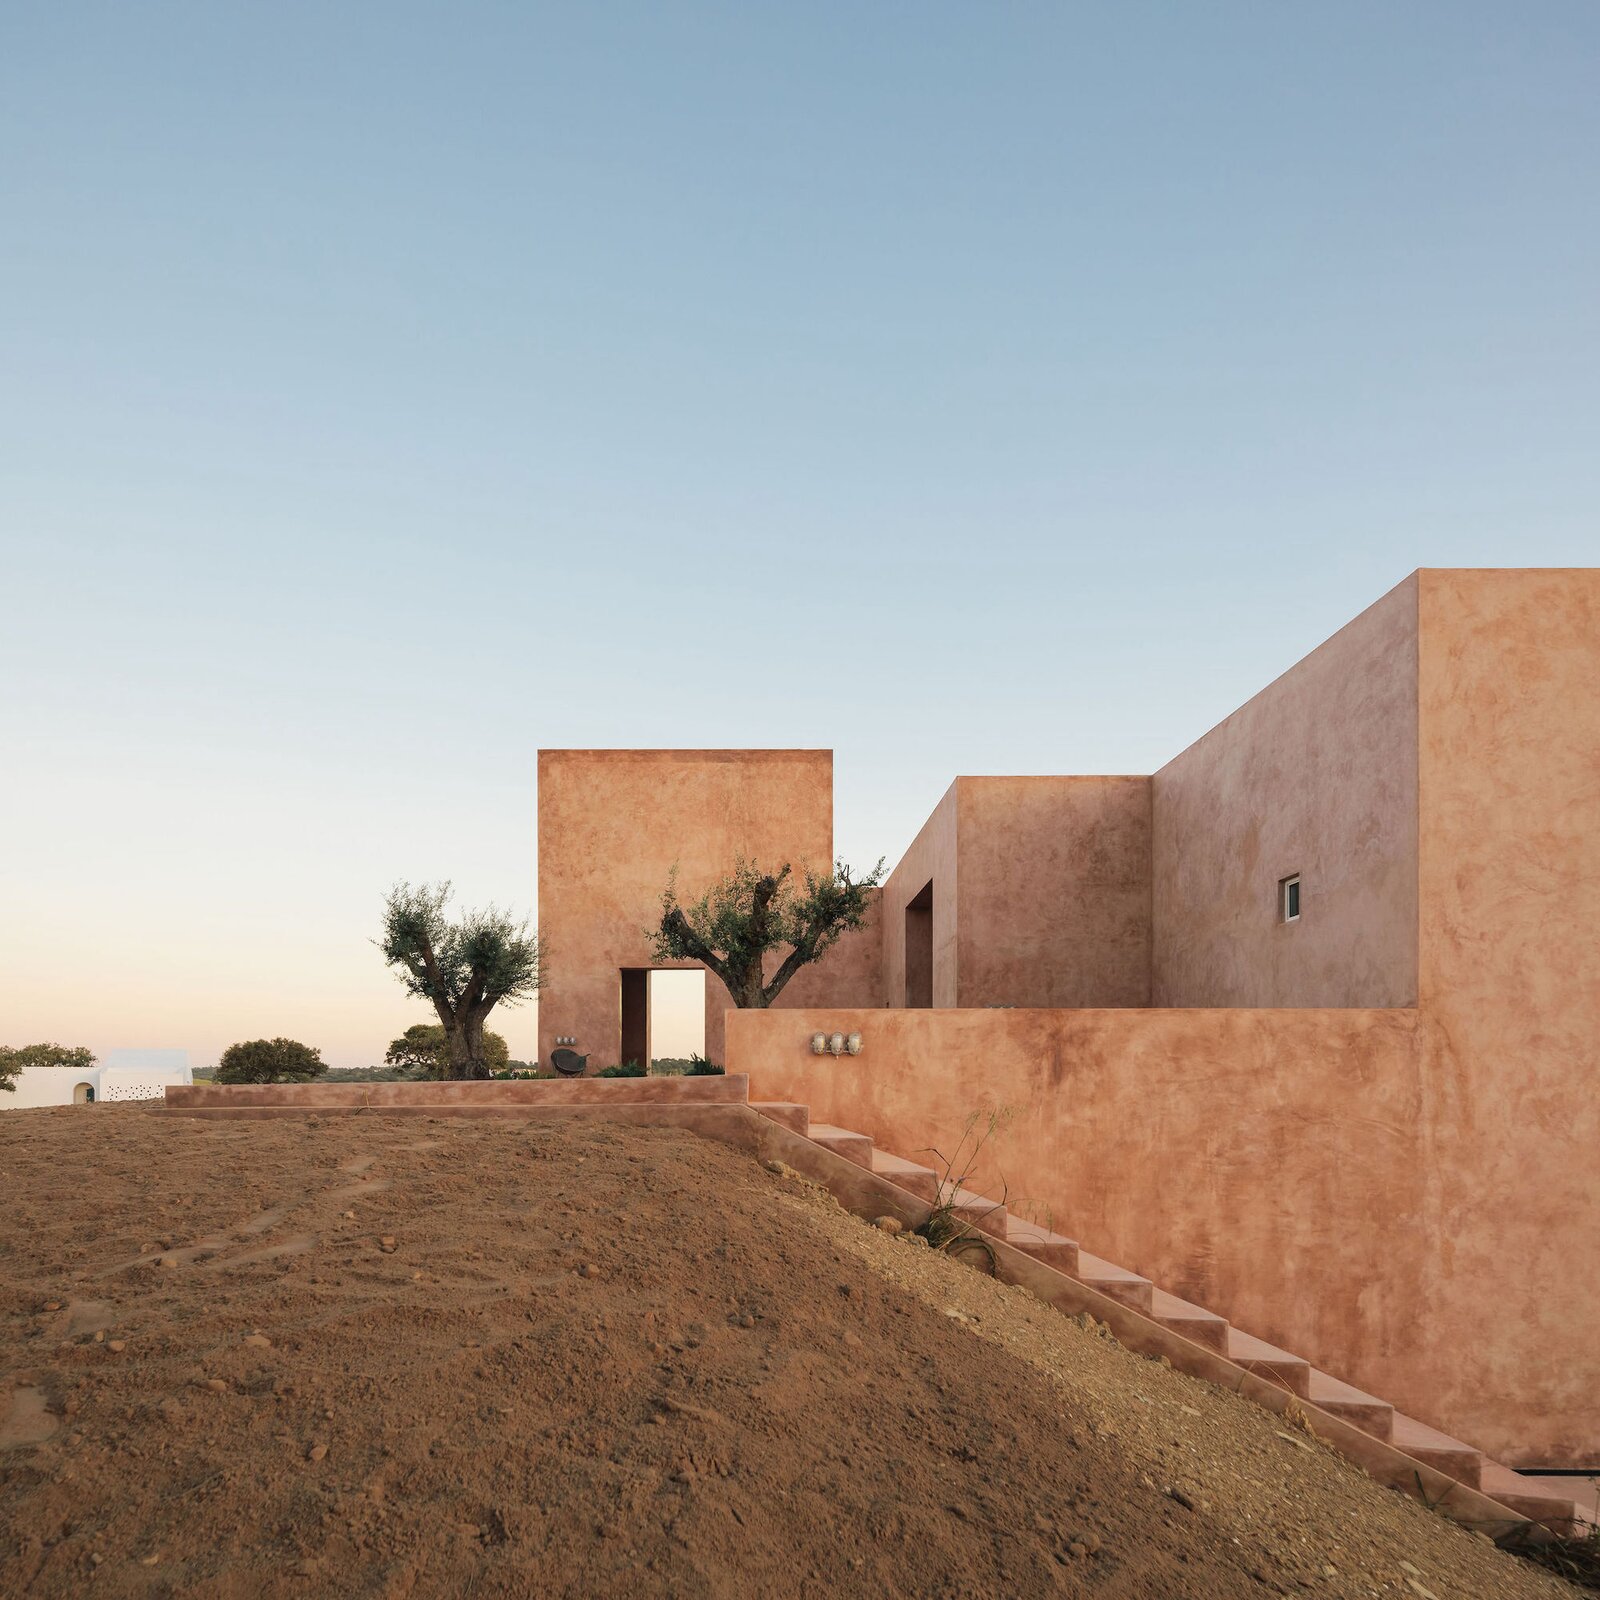 An Indoor/Outdoor Portuguese Getaway Blends Into the Arid Landscape